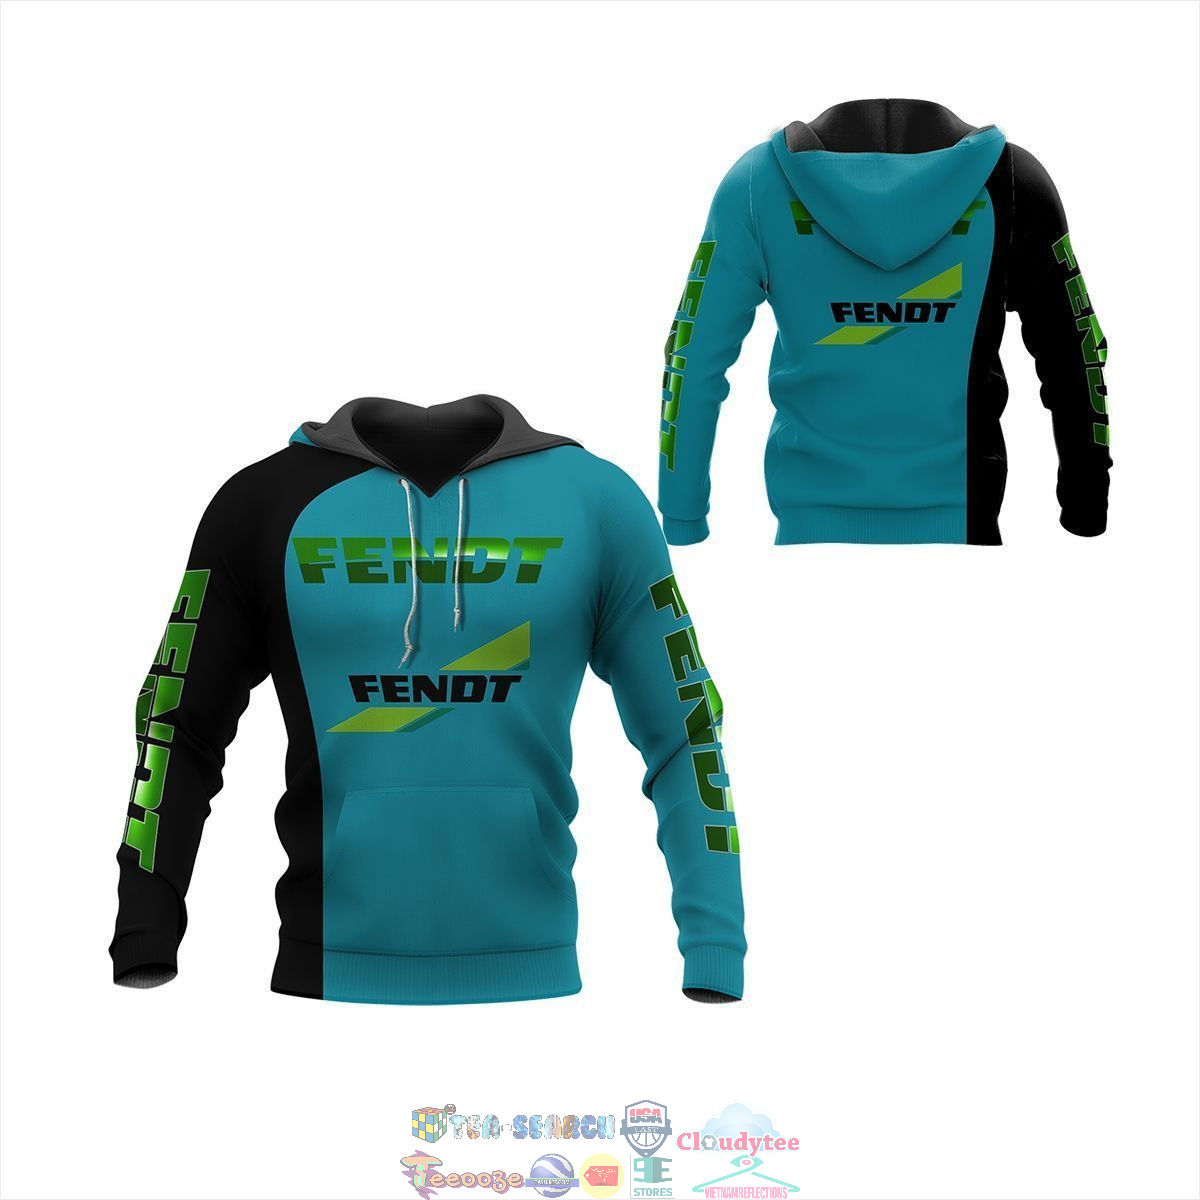 Fendt ver 1 3D hoodie and t-shirt